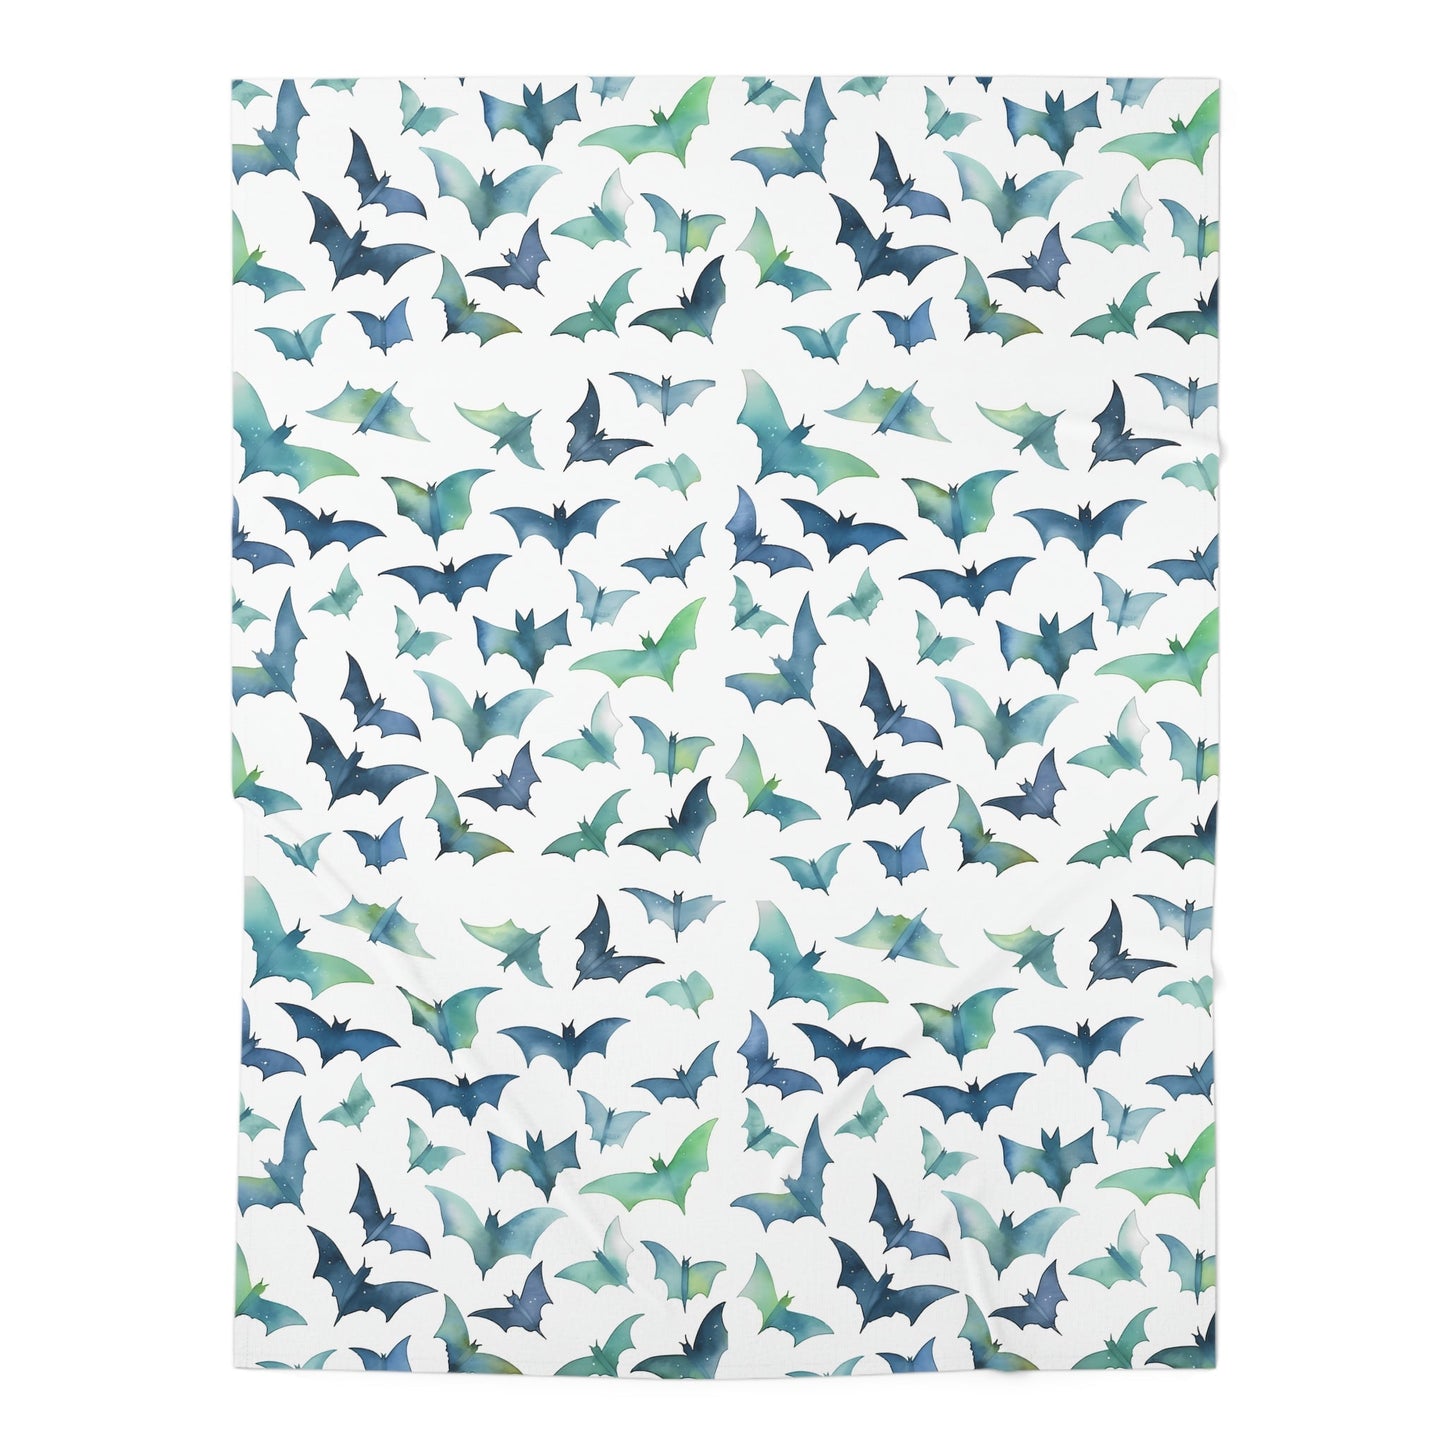 Blue Green Watercolor Bats Boys Baby Swaddle BlanketHome DecorVTZdesigns30" × 40"WhiteAccessoriesAll Over PrintAOP